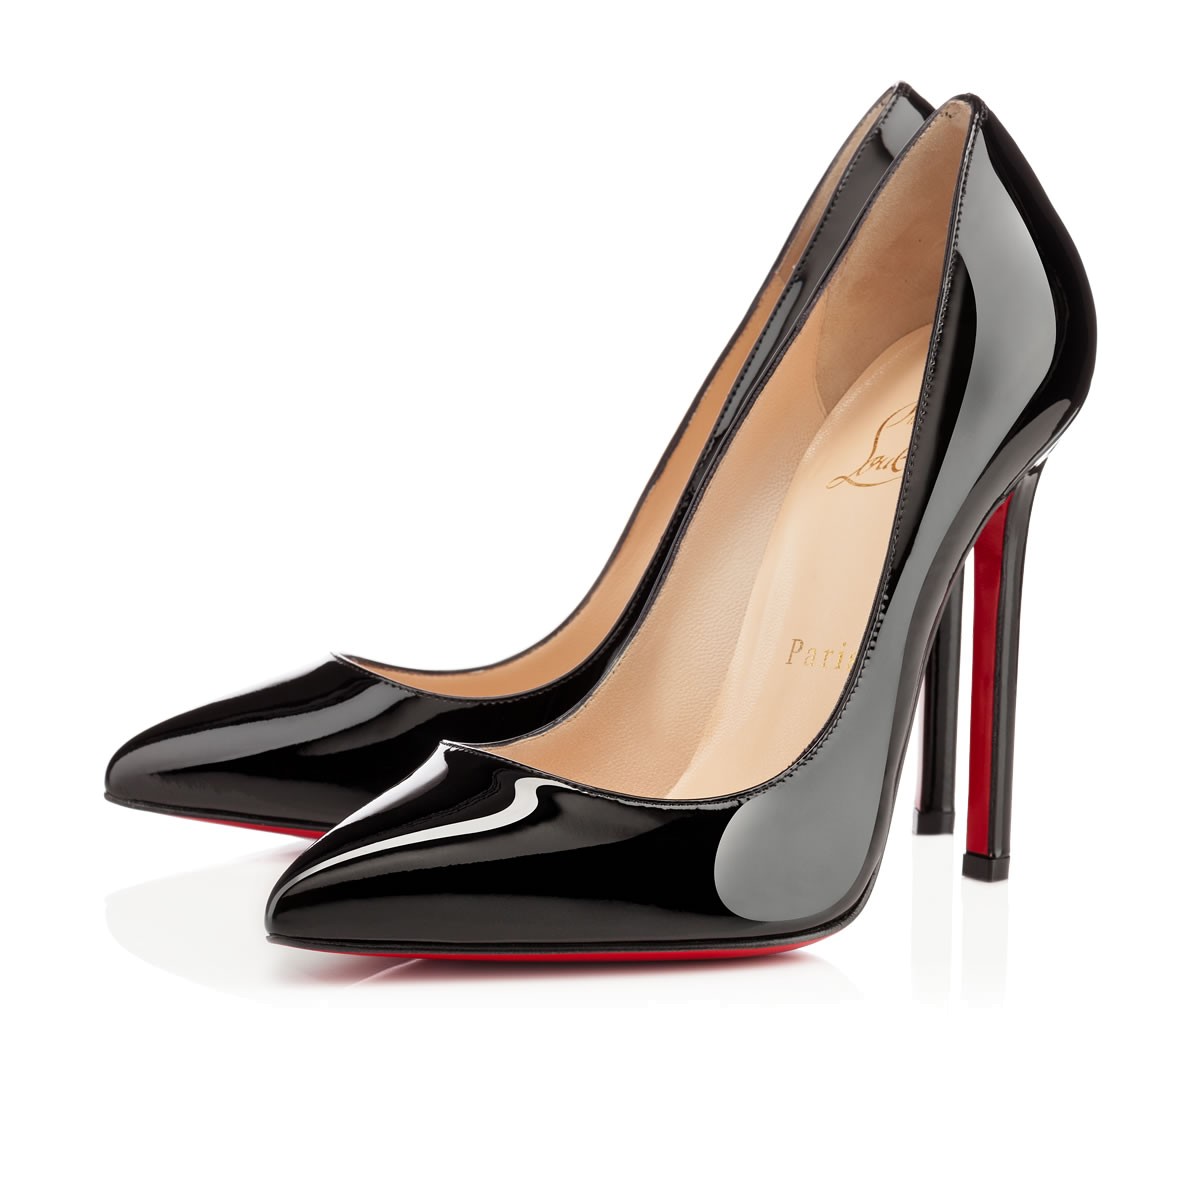 Iconic Louboutin Shoes Online Store, UP TO 52% OFF